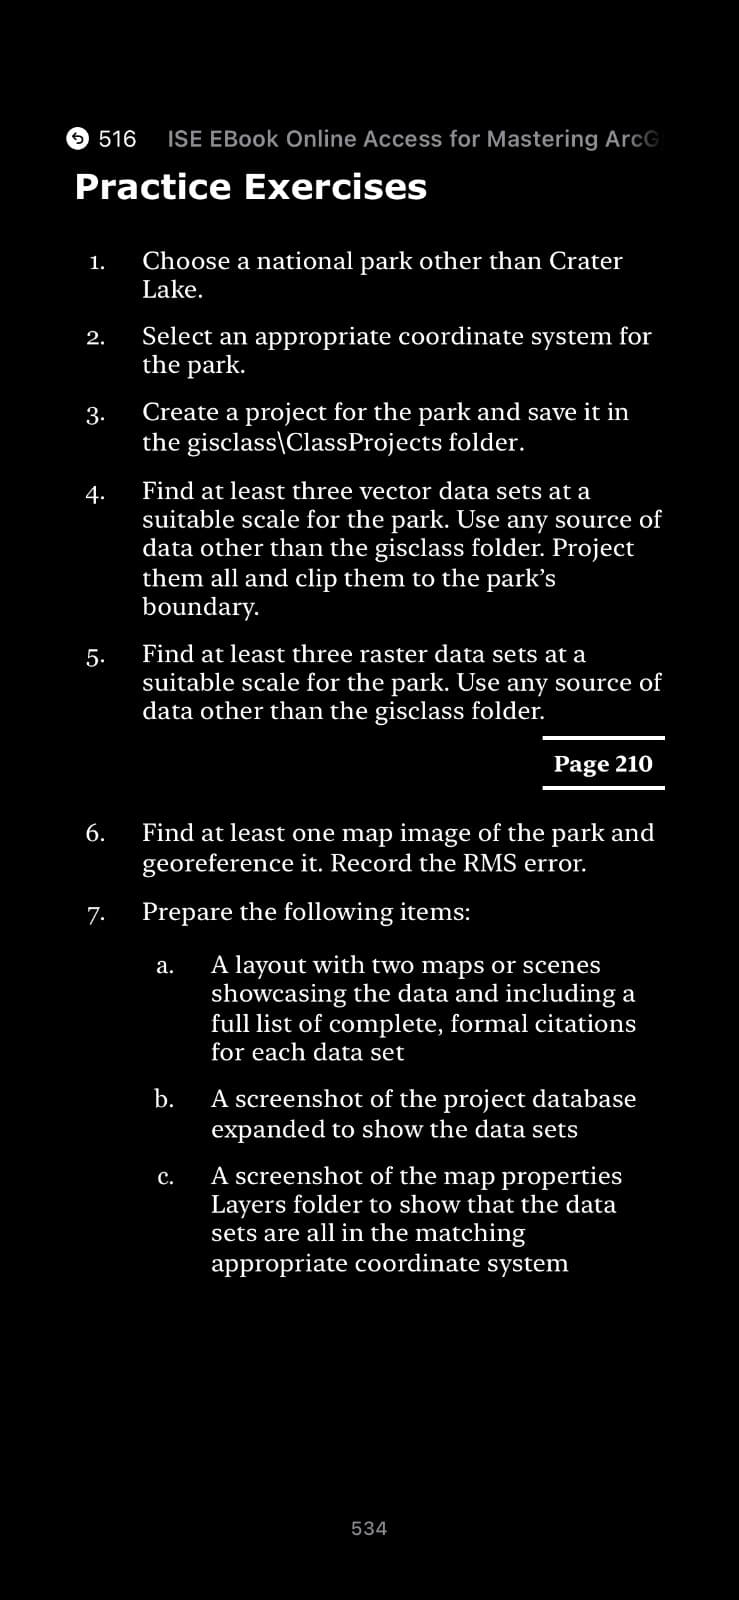 516
Practice Exercises
1.
2.
3.
4.
5.
6.
ISE EBook Online Access for Mastering ArcG
7.
Choose a national park other than Crater
Lake.
Select an appropriate coordinate system for
the park.
Create a project for the park and save it in
the gisclass\ClassProjects folder.
Find at least three vector data sets at a
suitable scale for the park. Use any source of
data other than the gisclass folder. Project
them all and clip them to the park's
boundary.
Find at least three raster data sets at a
suitable scale for the park. Use any source of
data other than the gisclass folder.
Find at least one map image of the park and
georeference it. Record the RMS error.
Prepare the following items:
a.
b.
C.
Page 210
A layout with two maps or scenes
showcasing the data and including a
full list of complete, formal citations
for each data set
A screenshot of the project database
expanded to show the data sets
A screenshot of the map properties
Layers folder to show that the data
sets are all in the matching
appropriate coordinate system
534